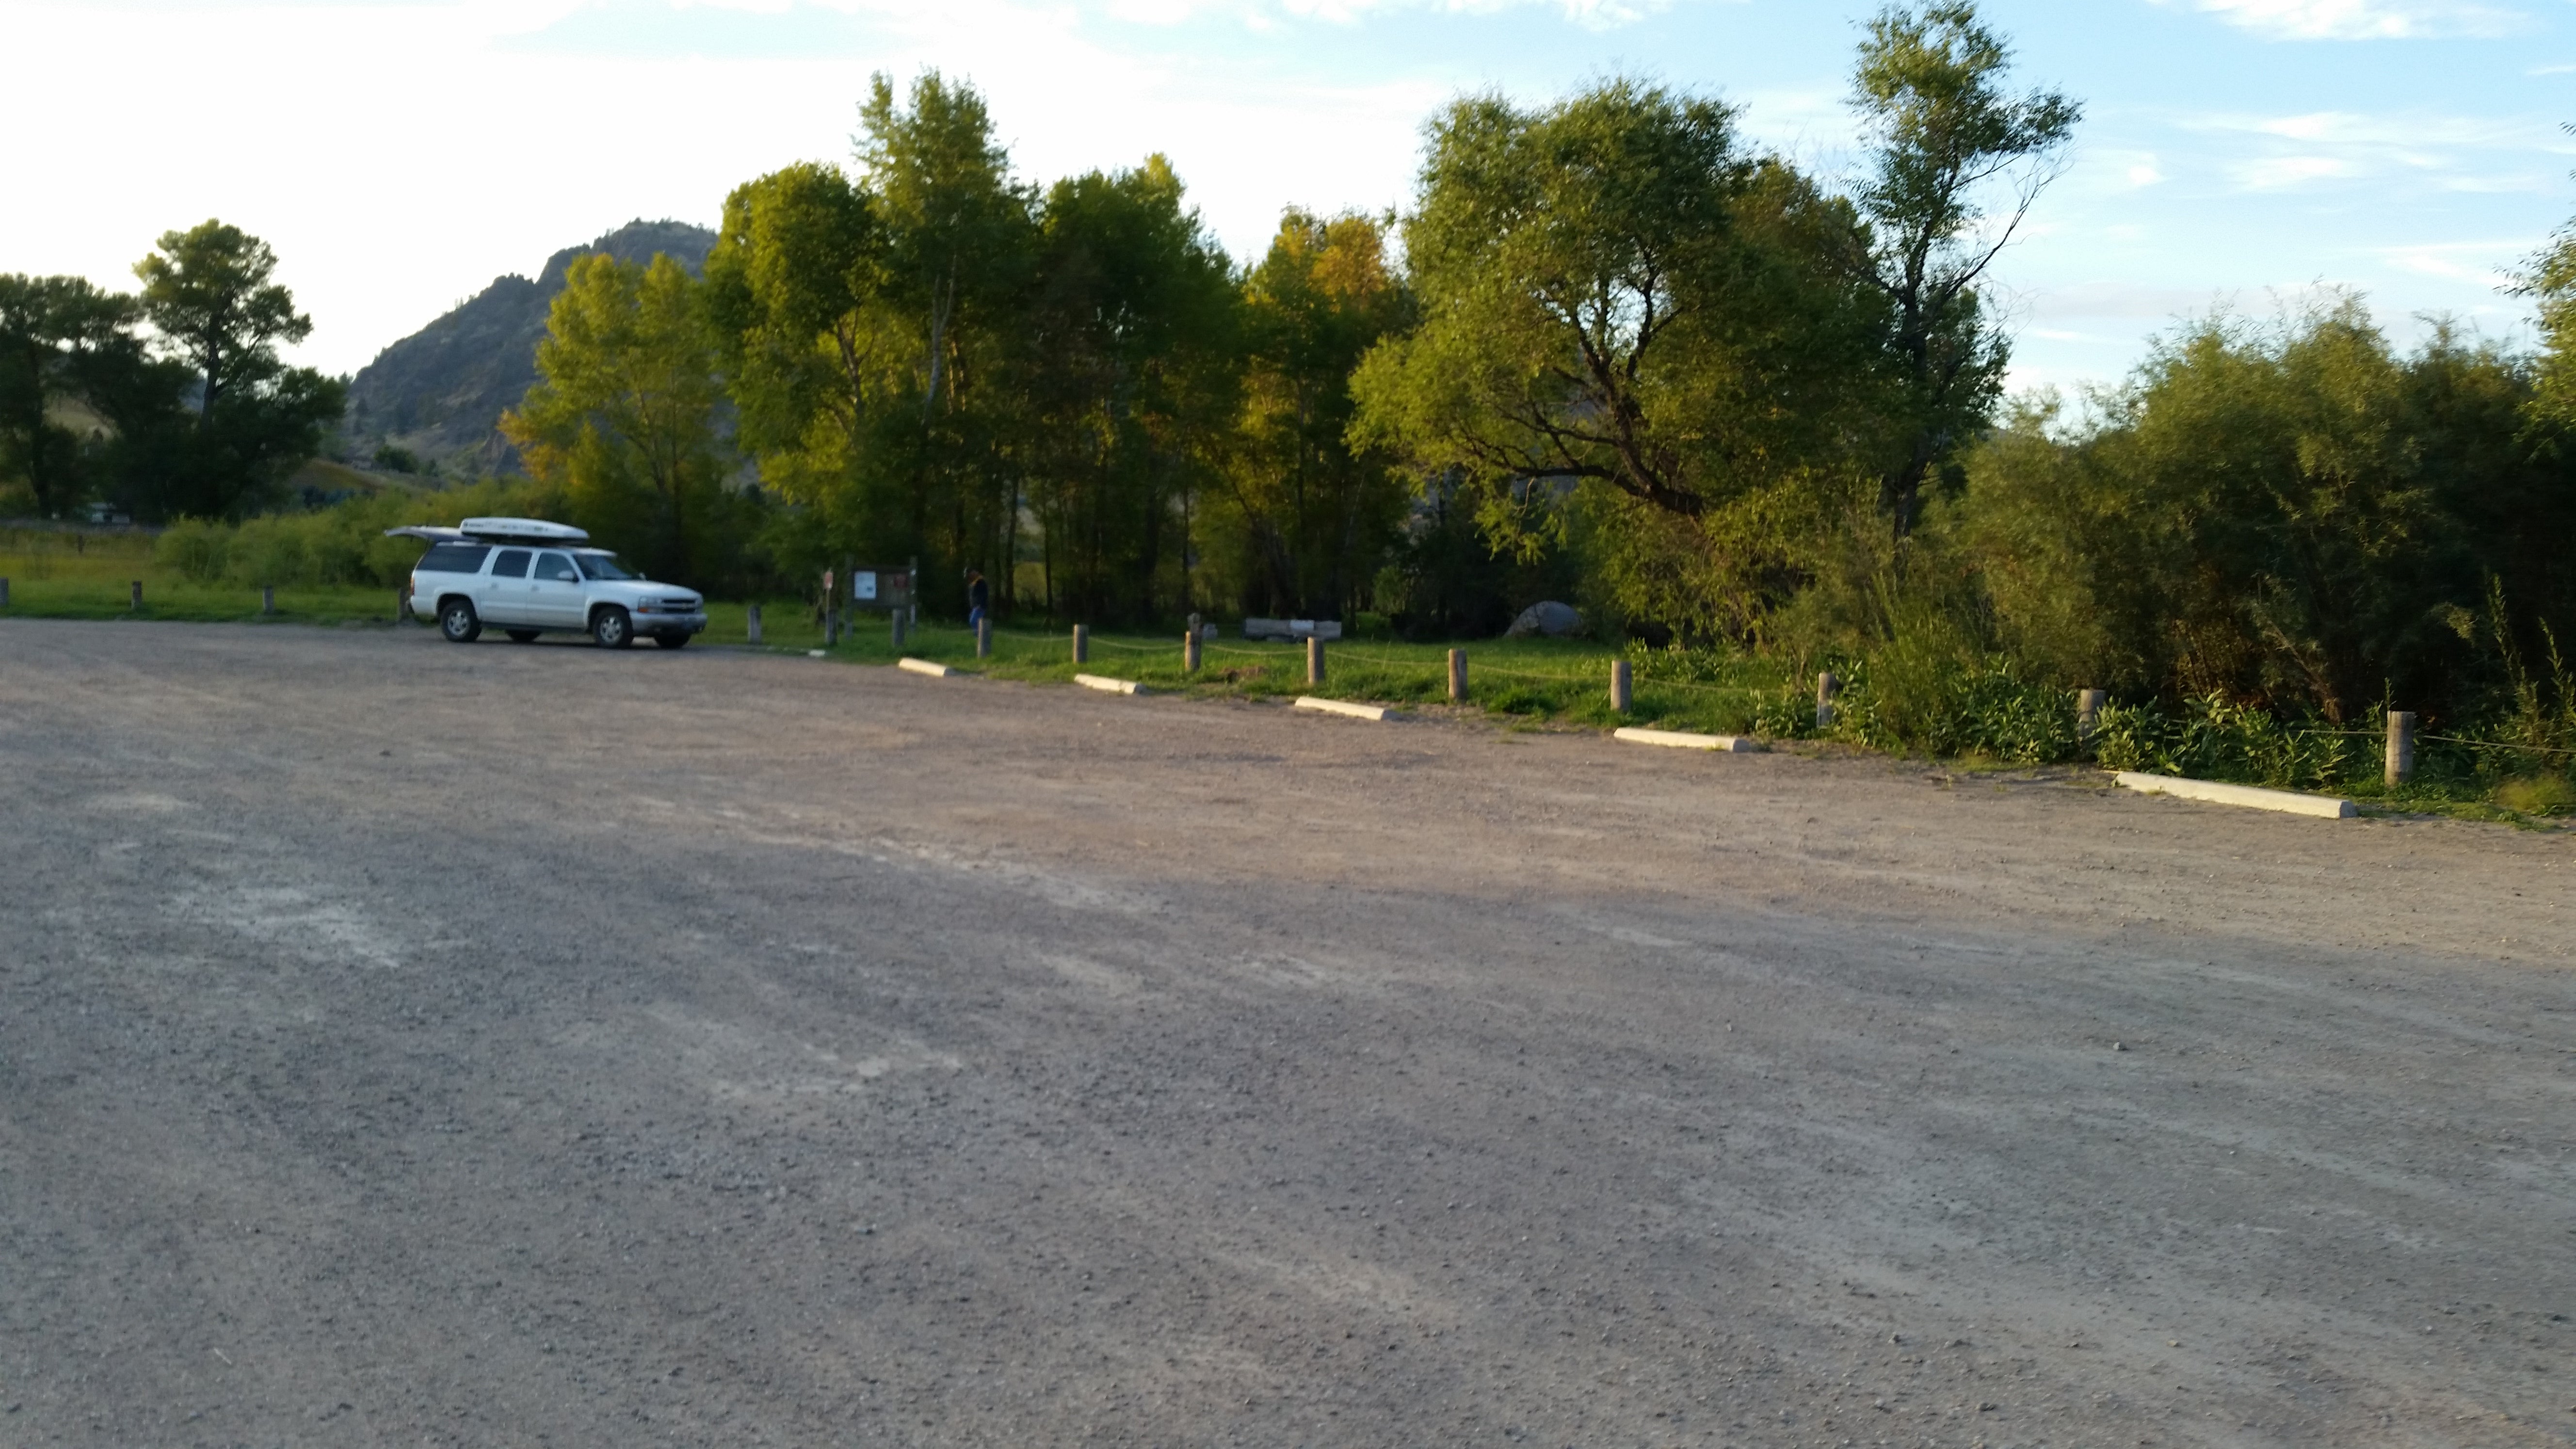 Parking area and camp site